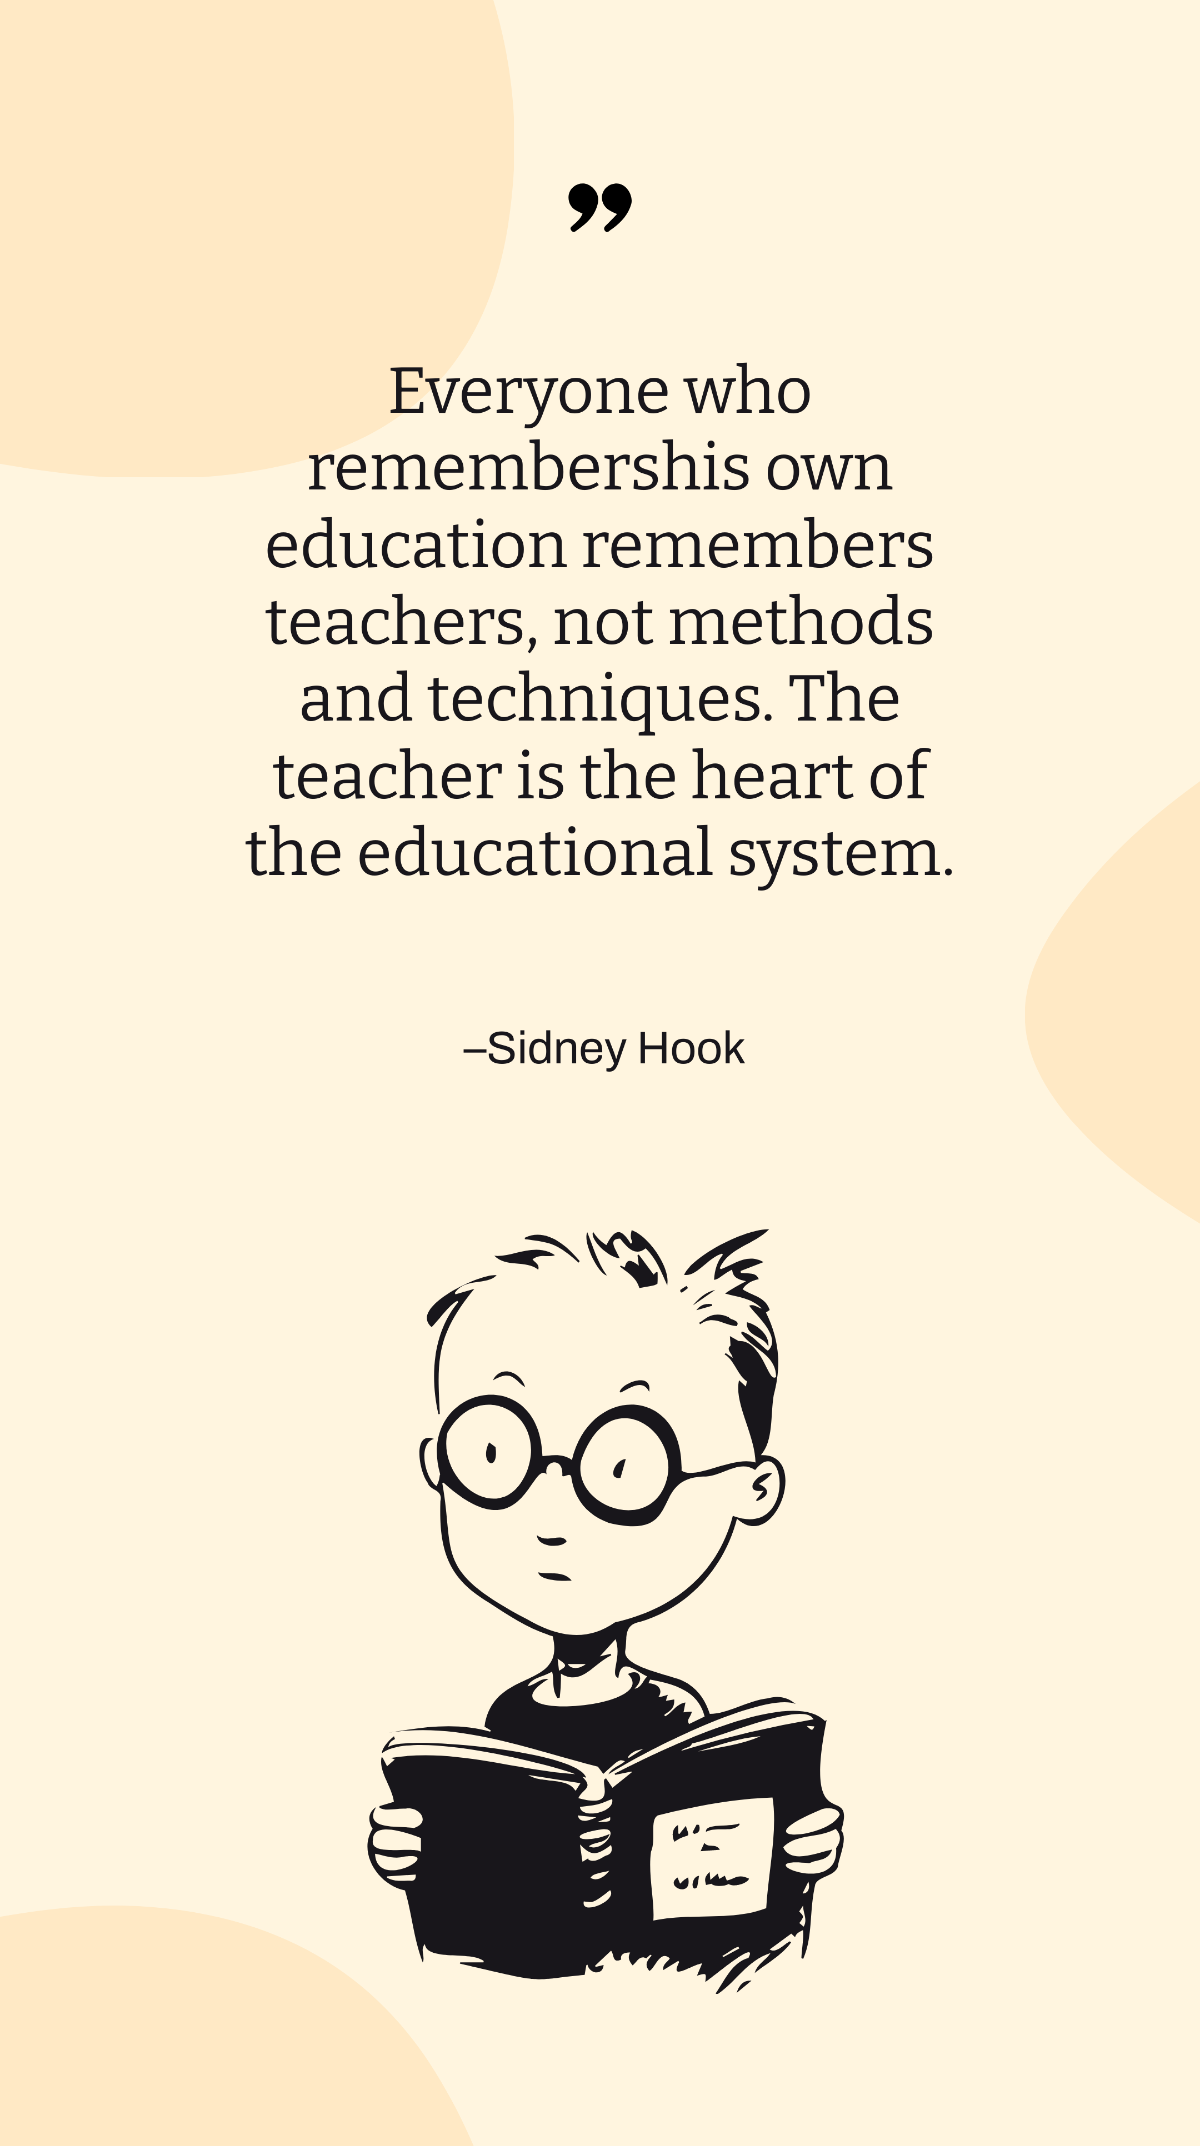 Sidney Hook - Everyone who remembers his own education remembers teachers, not methods and techniques. The teacher is the heart of the educational system. Template